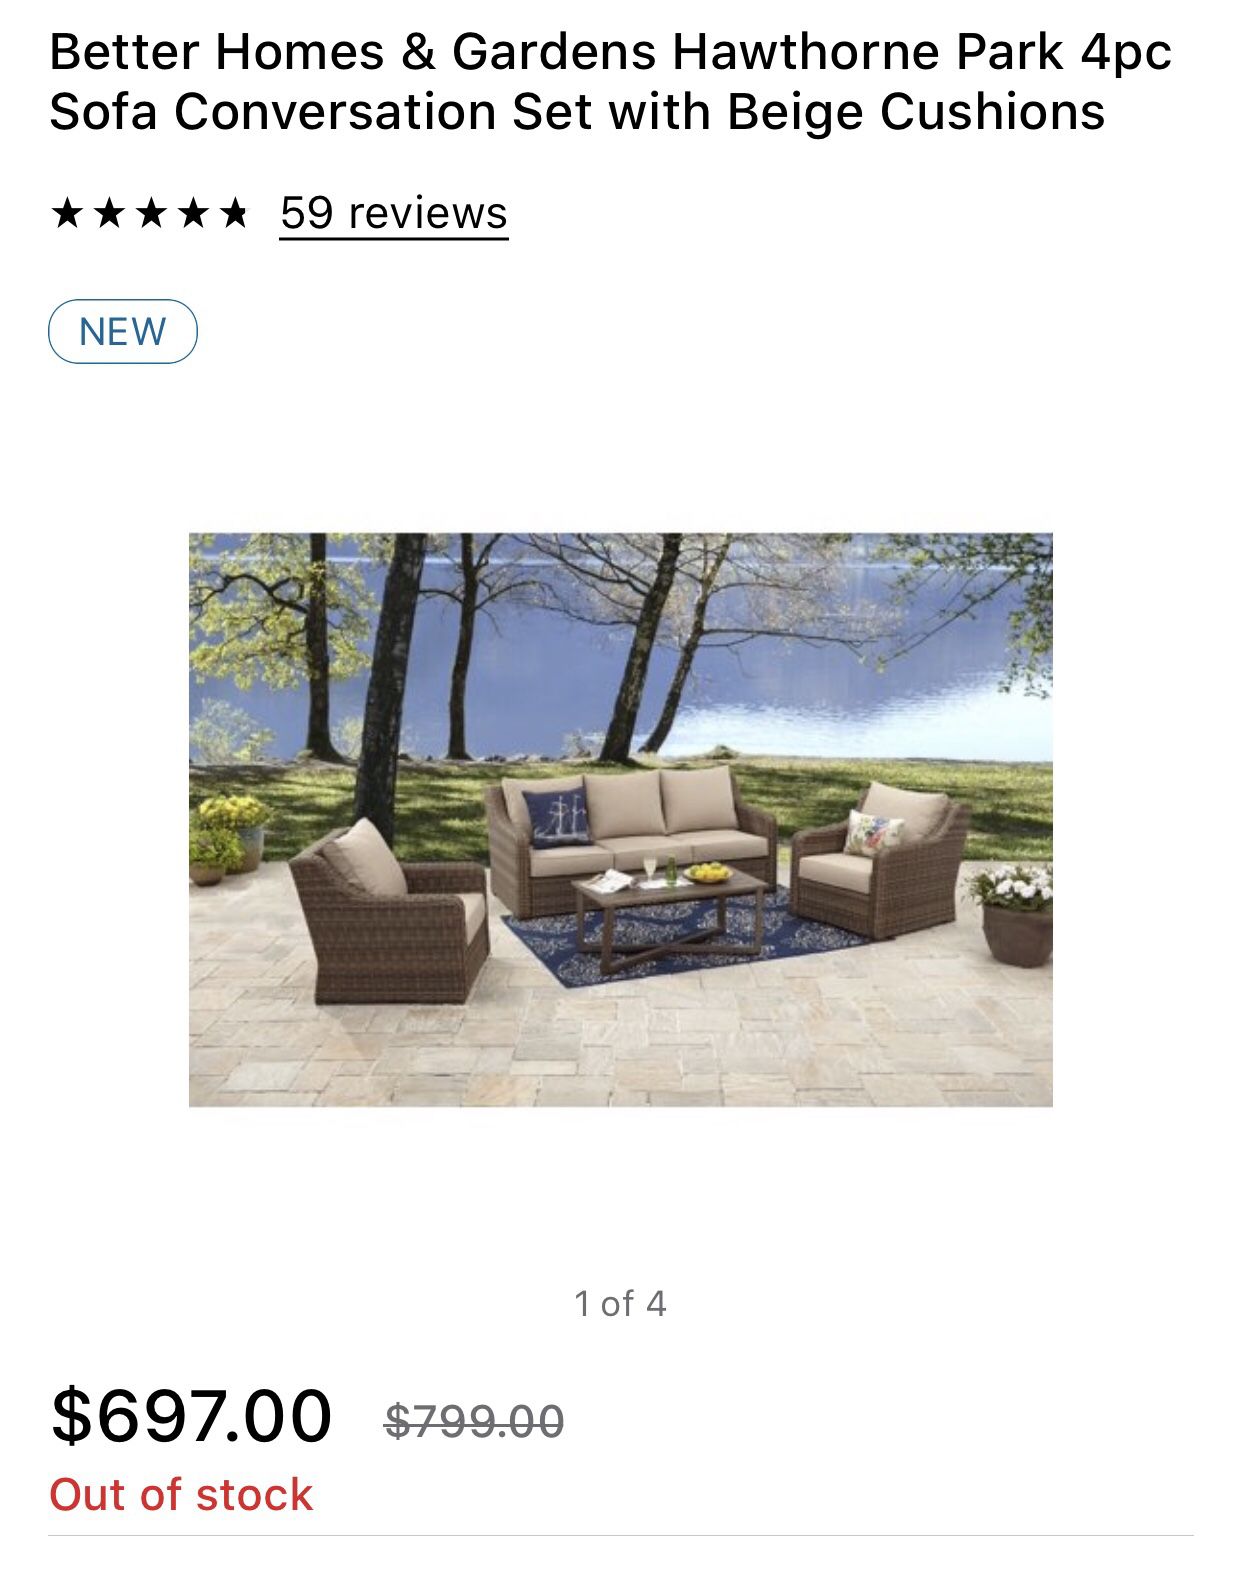 Brand new. Better home and garden patio furniture set